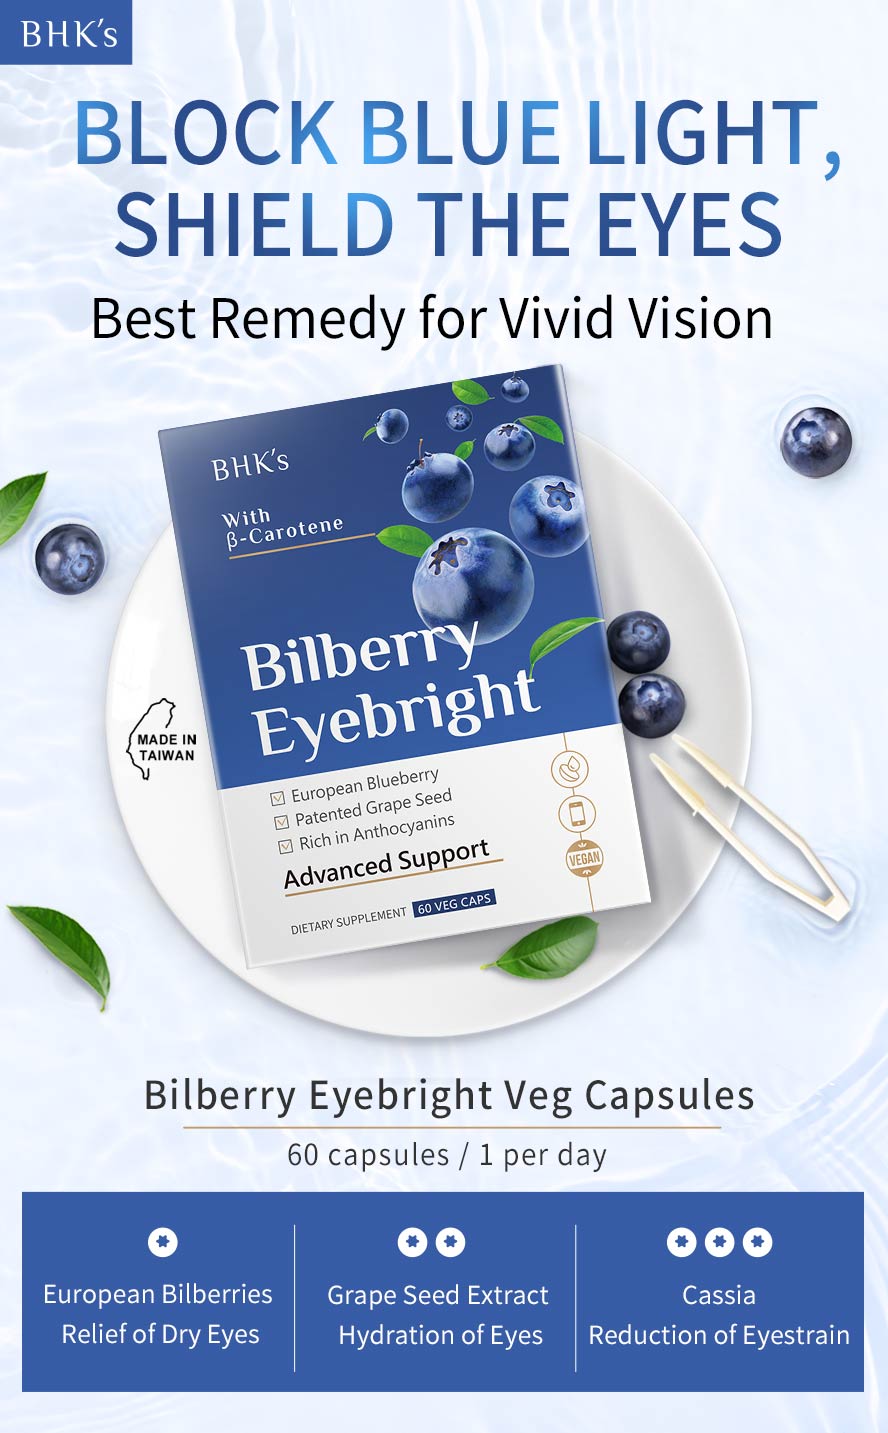 BHK's Bilberry Eyebright Veg Capsules is the best remedy for eye health and vivid vision